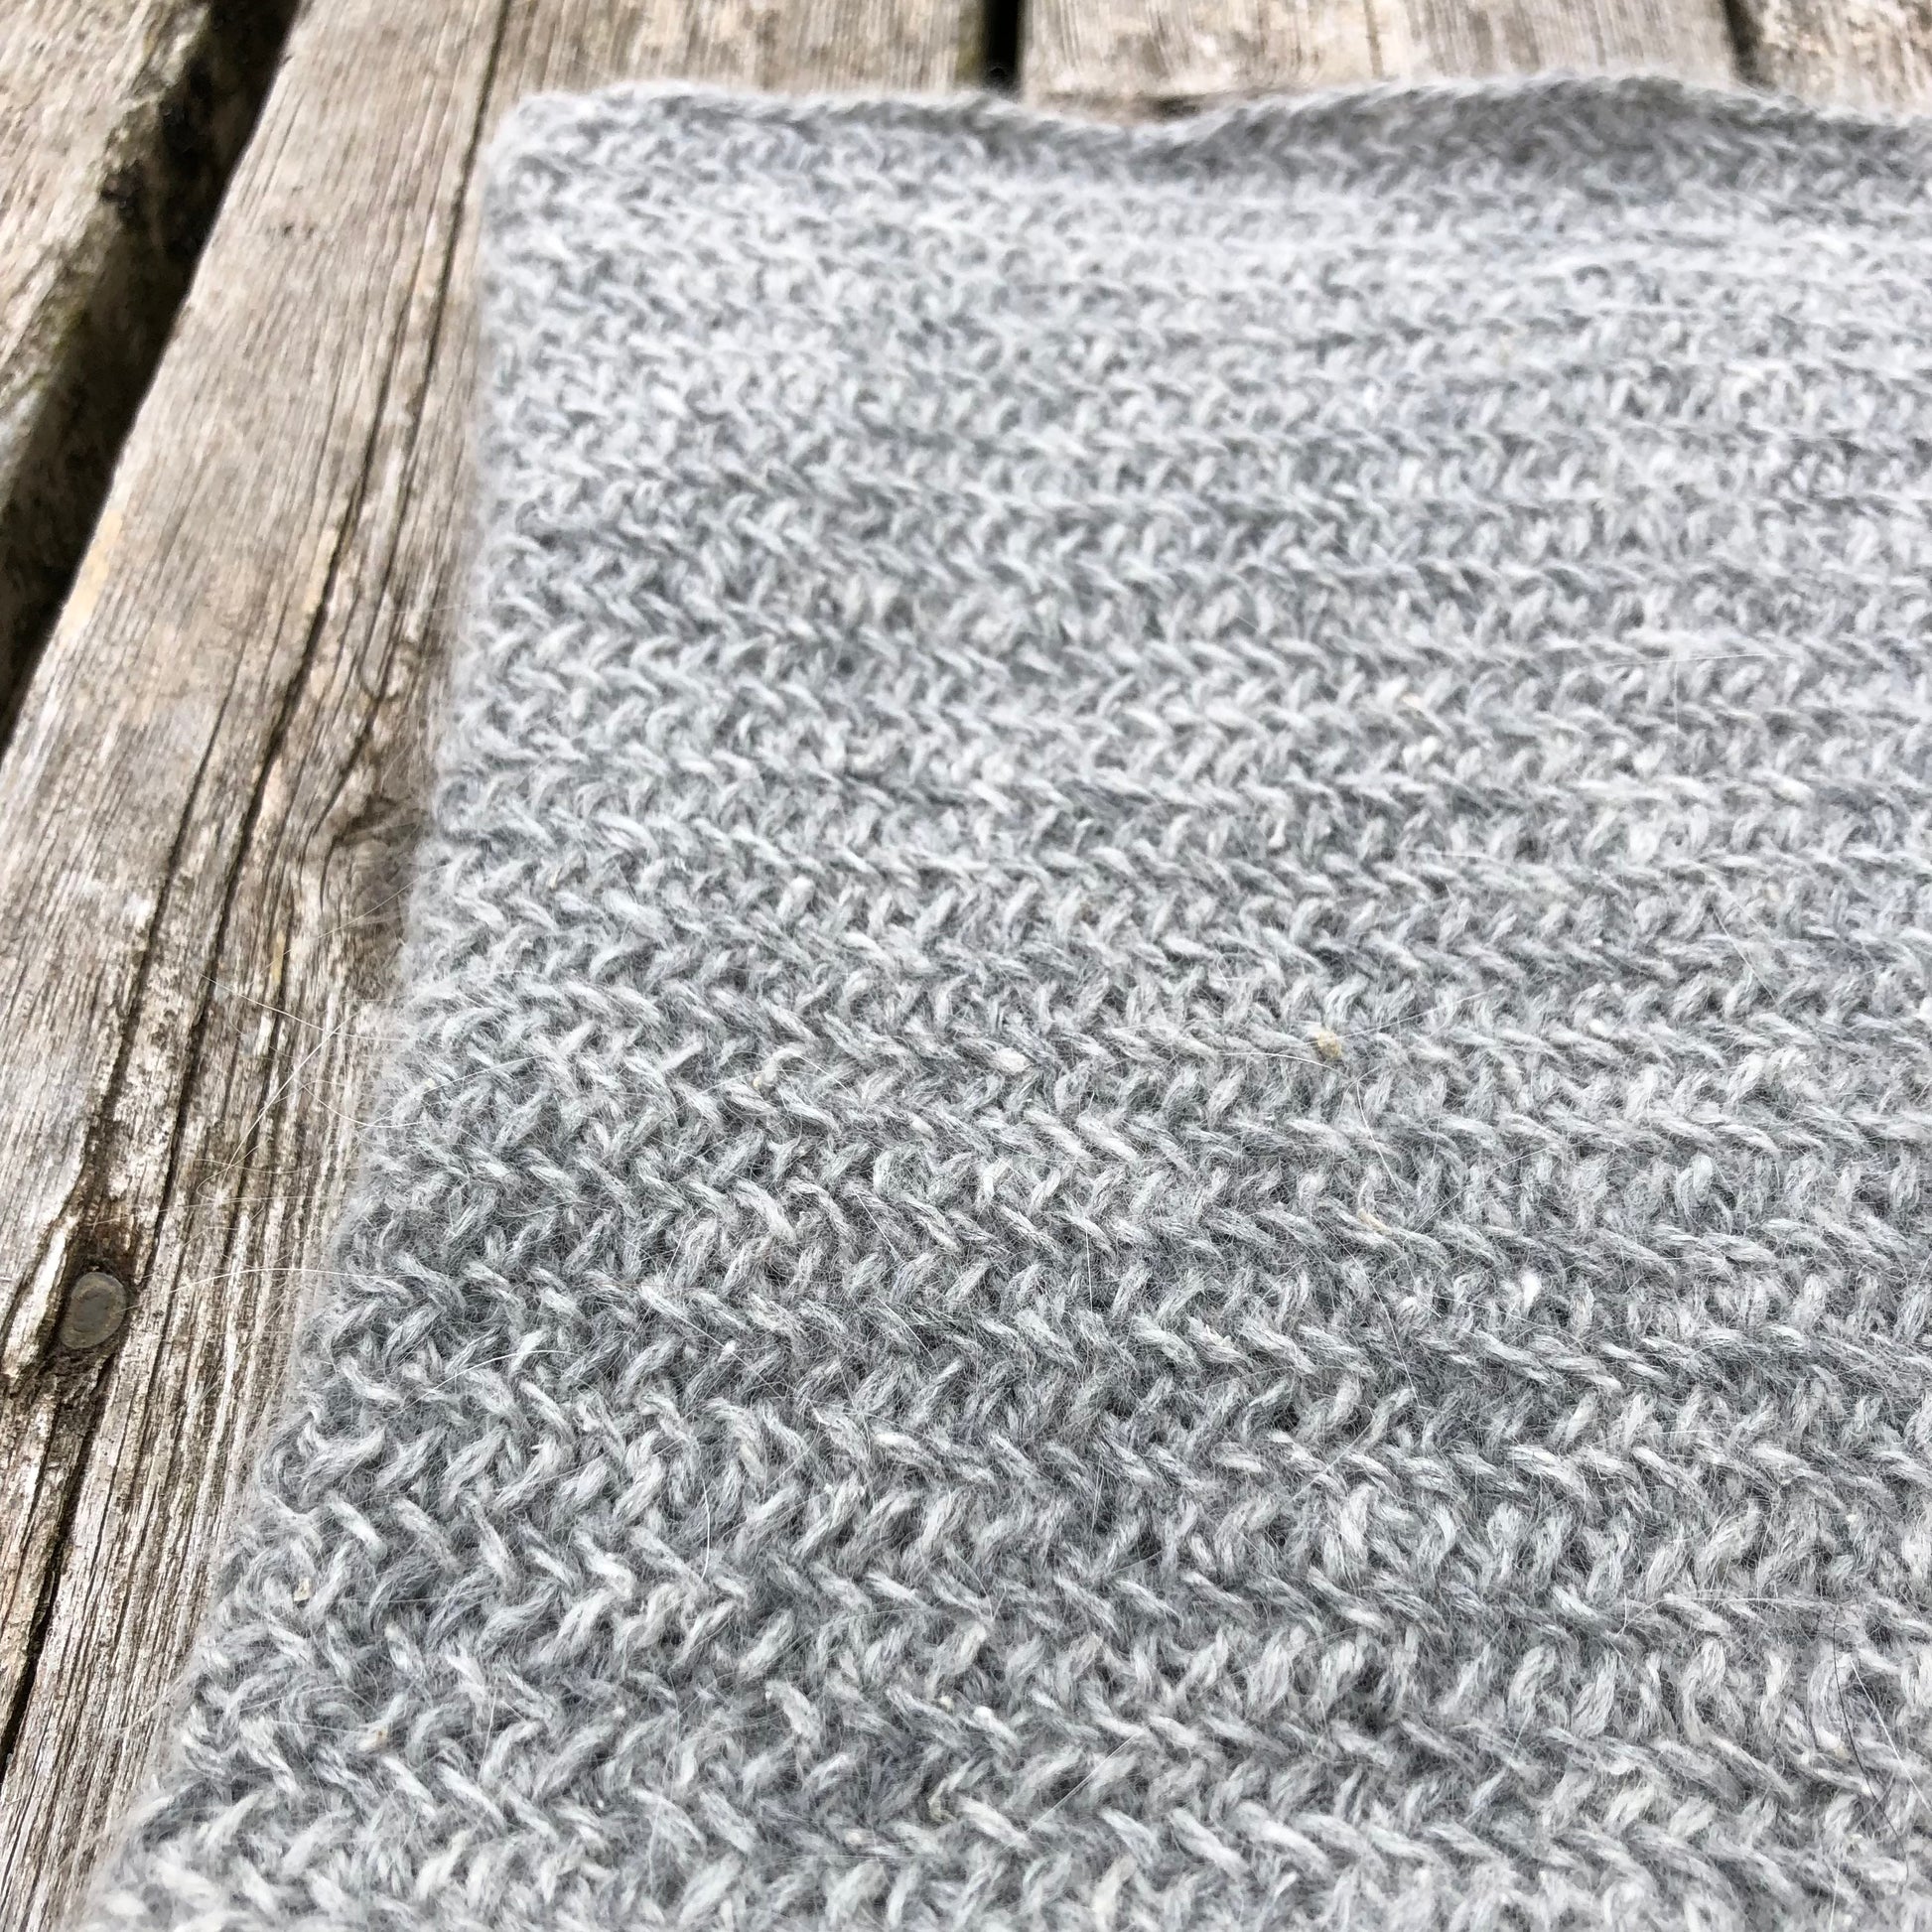 Up close shot of the grey ramie/acrylic/angora yarn and the stitches of this neck warmer.